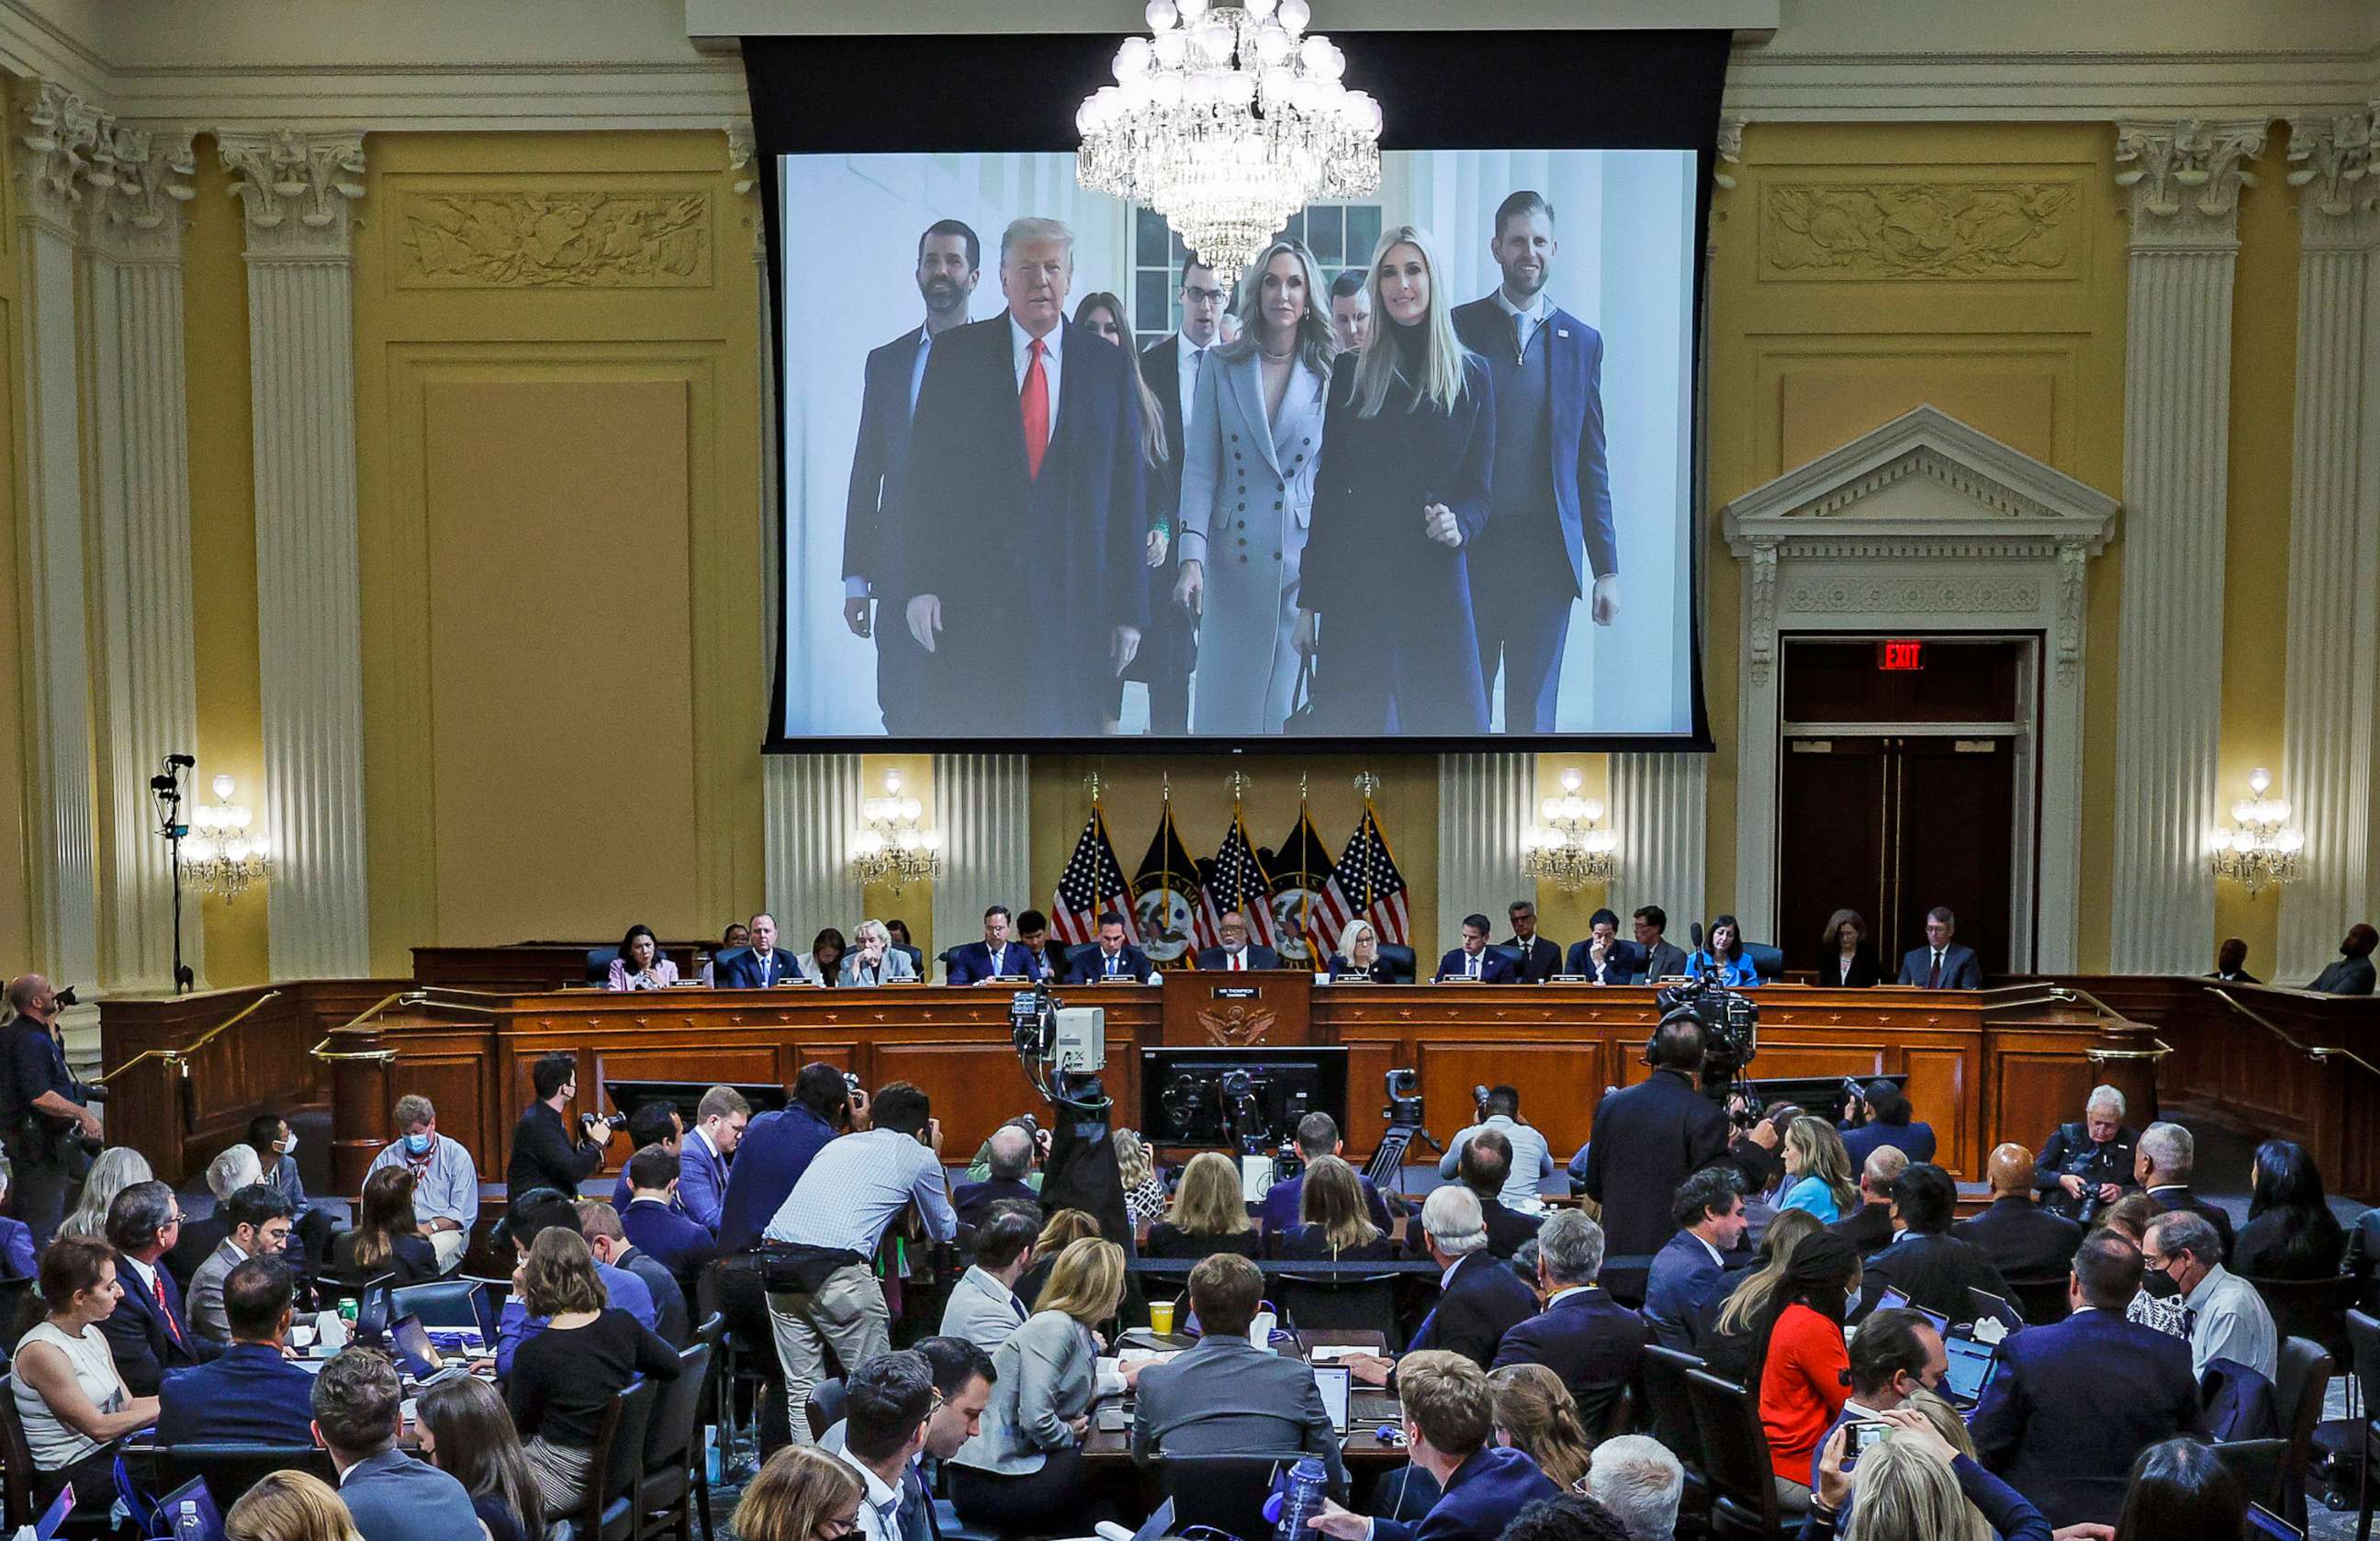 PHOTO: An image of former President Donald Trump and his family is displayed on a screen at the hearing where the House Select Committee investigates the Jan. 6 Attack on the US Capitol, in Washington, D.C., June 16, 2022.